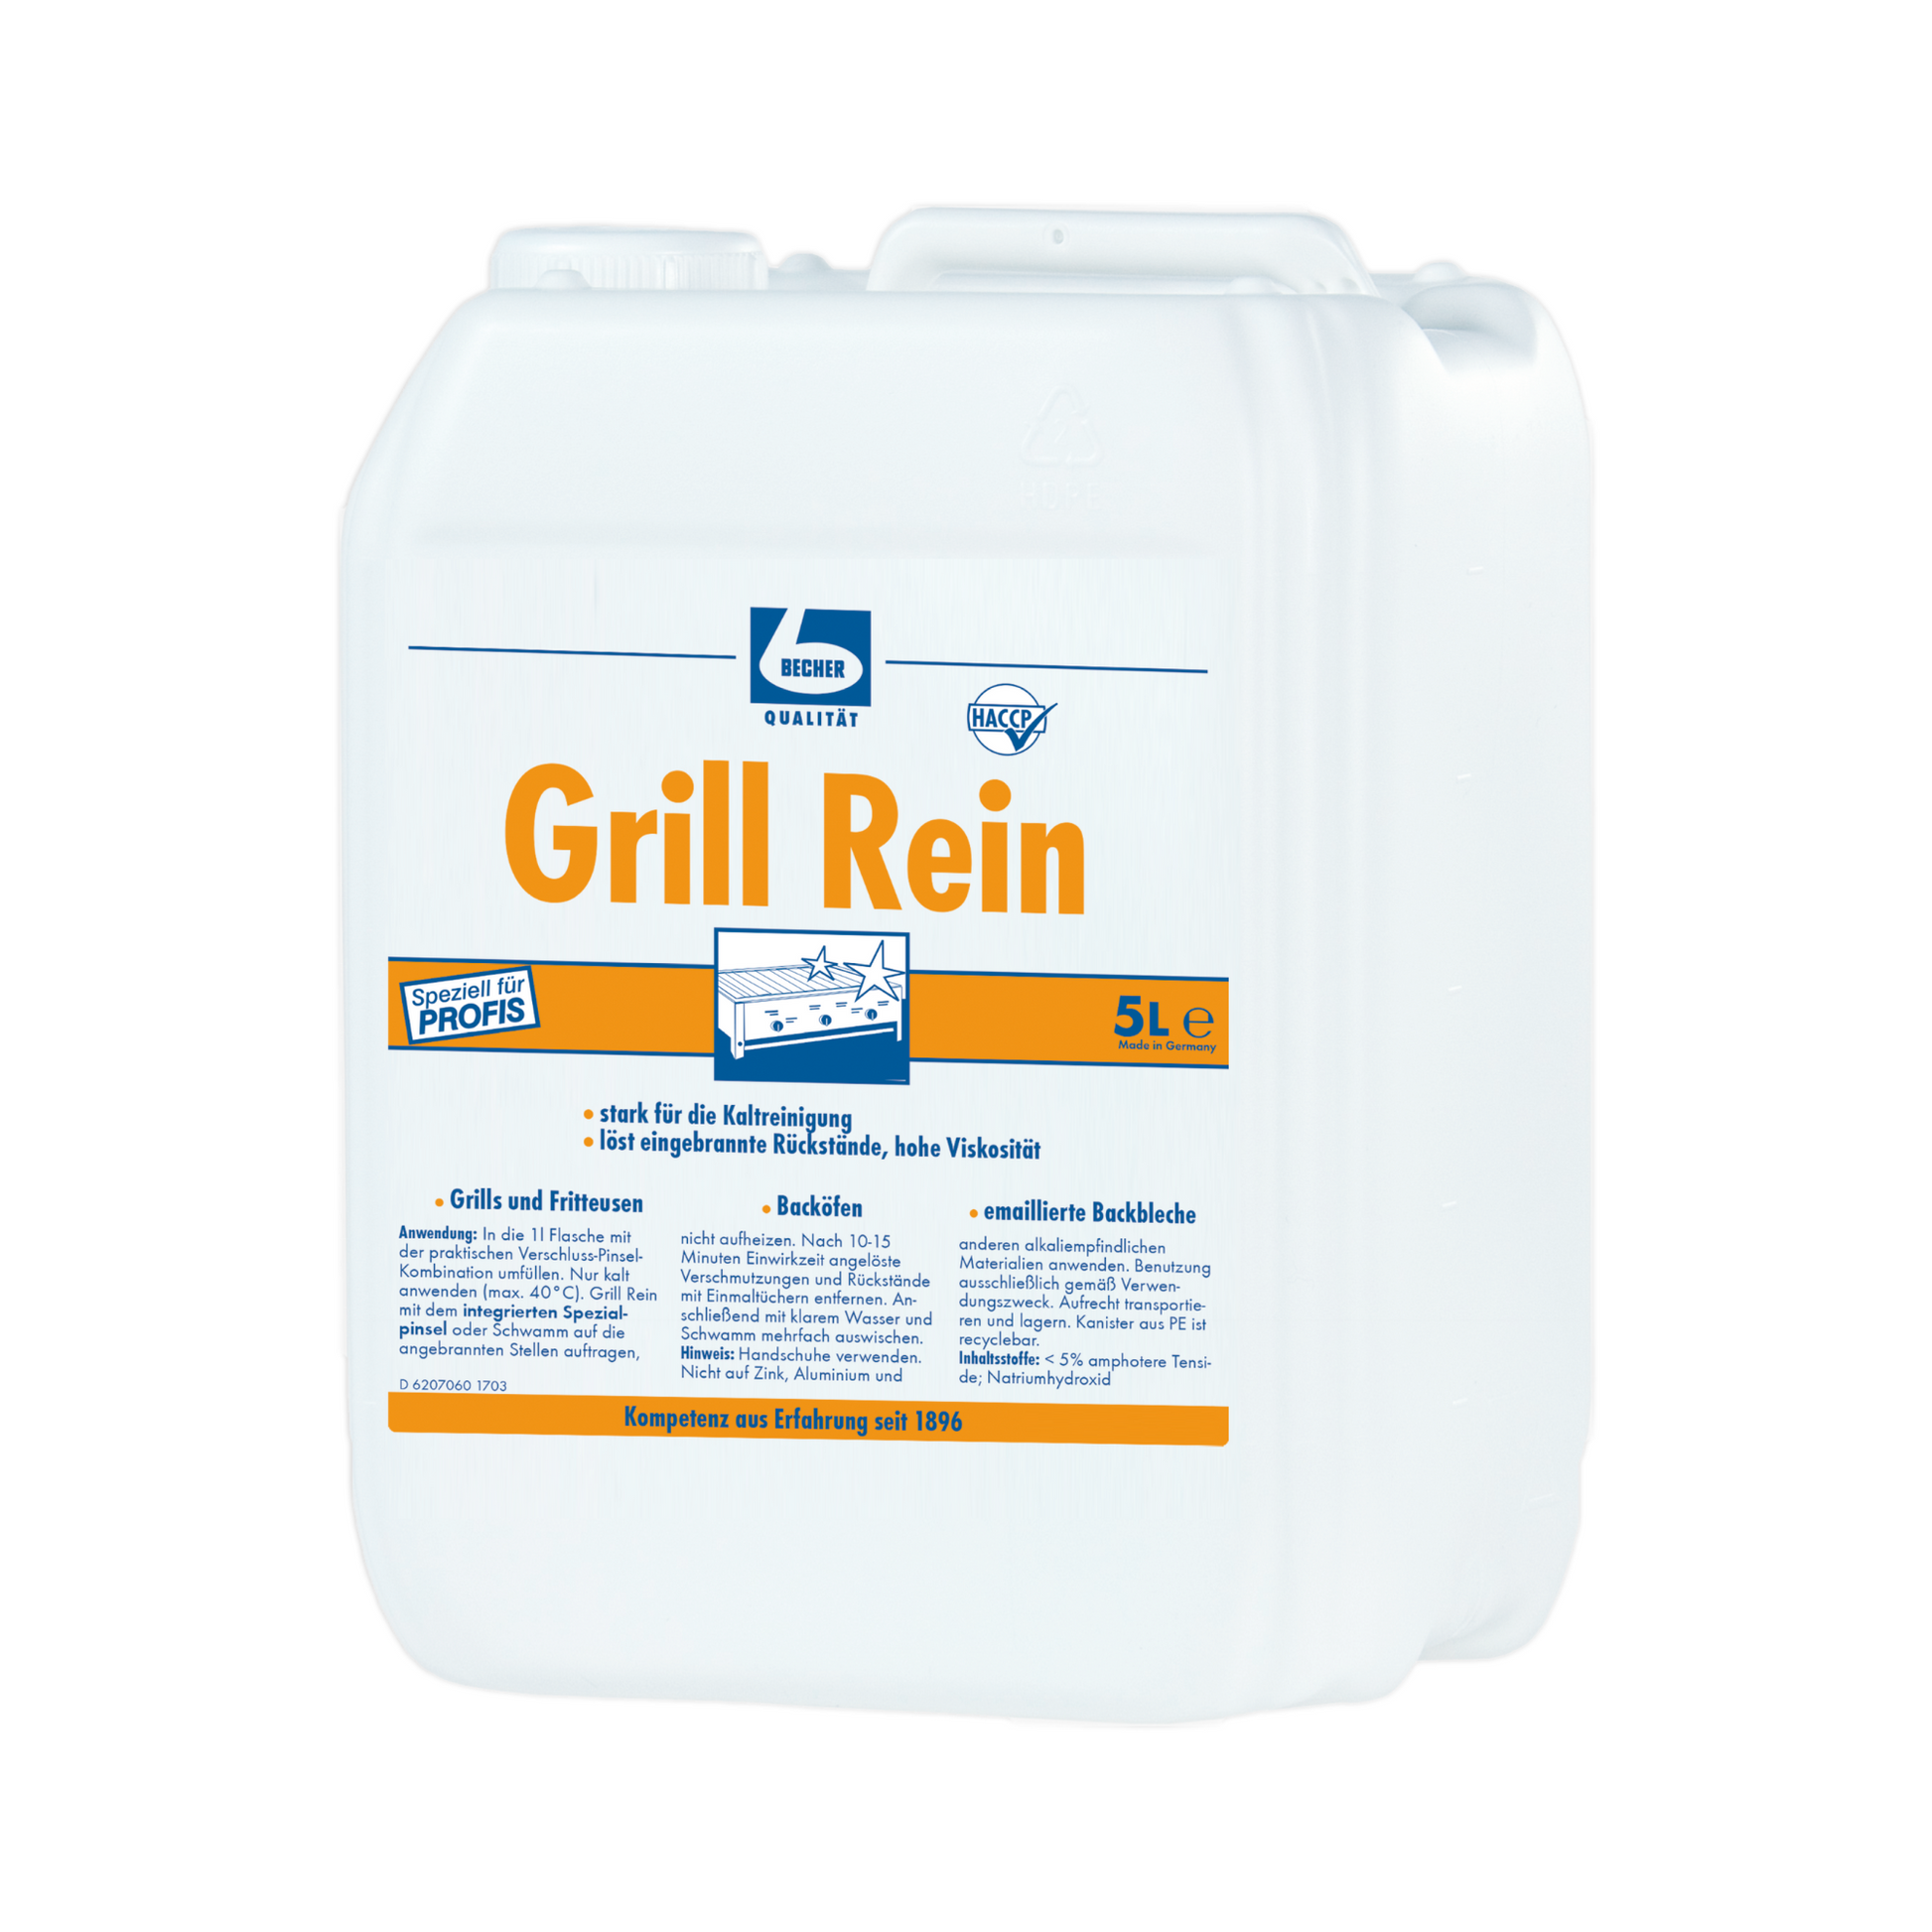 Dr. Grill pure grill cleaner